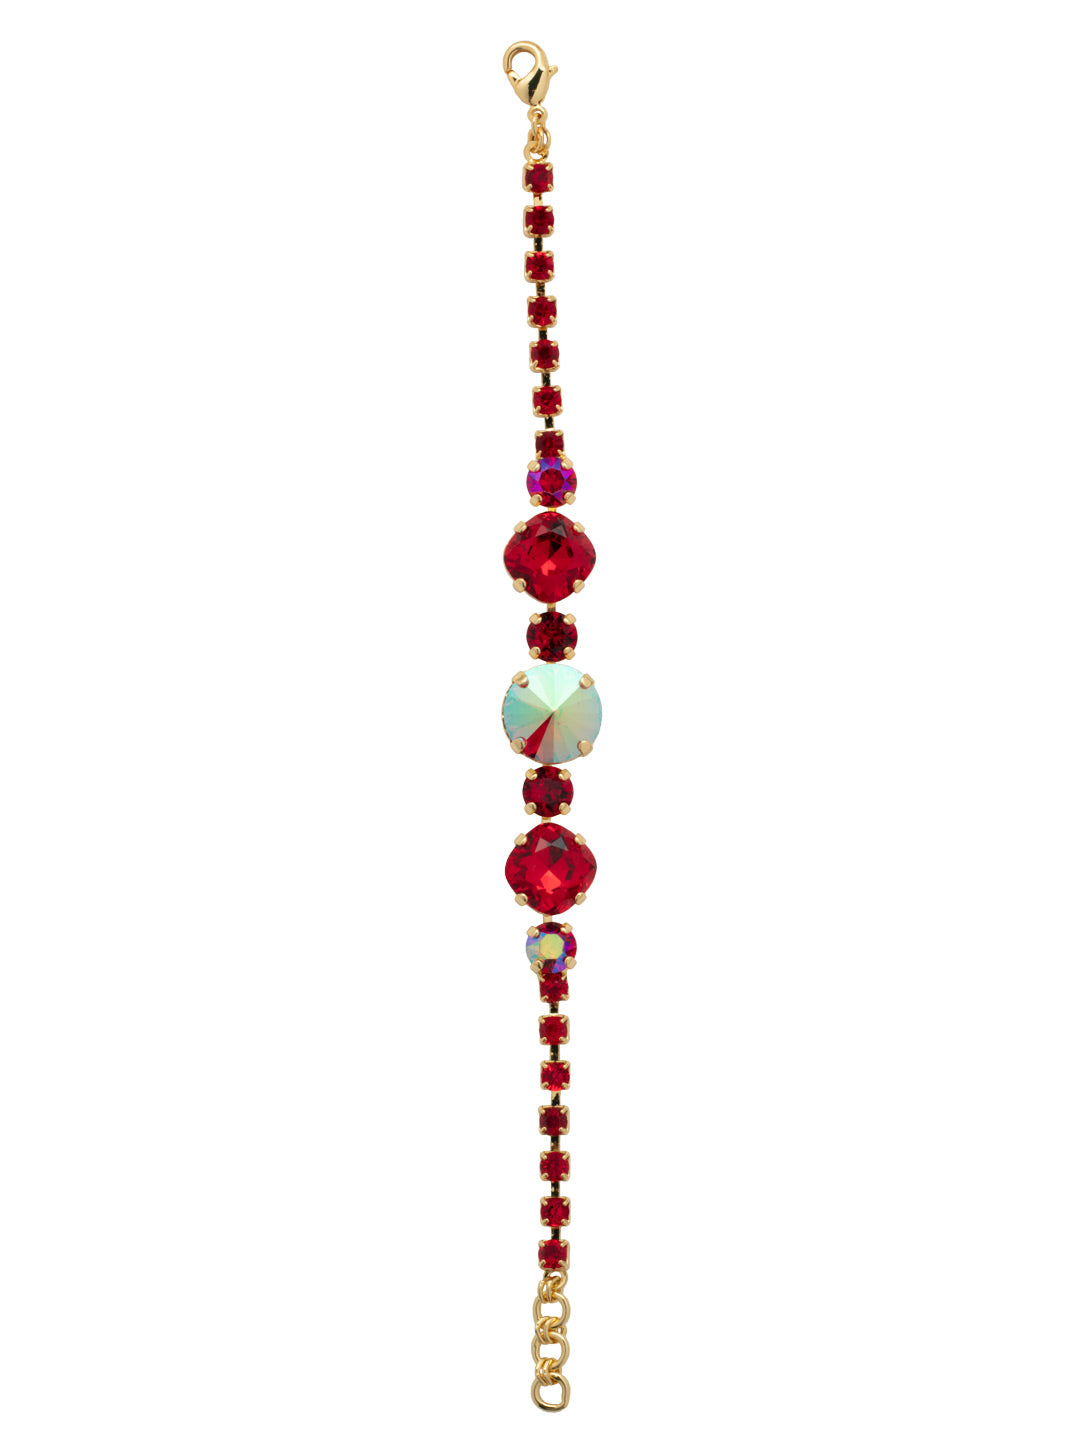 Half Circle Tennis Bracelet - BEY52BGCB - <p>The Half Circle Tennis Bracelet adds the perfect amount of sparkle to every outfit. A crystal embellished chain connects varying sizes and colors of crystals with a lobster clasp closure. From Sorrelli's Cranberry collection in our Bright Gold-tone finish.</p>